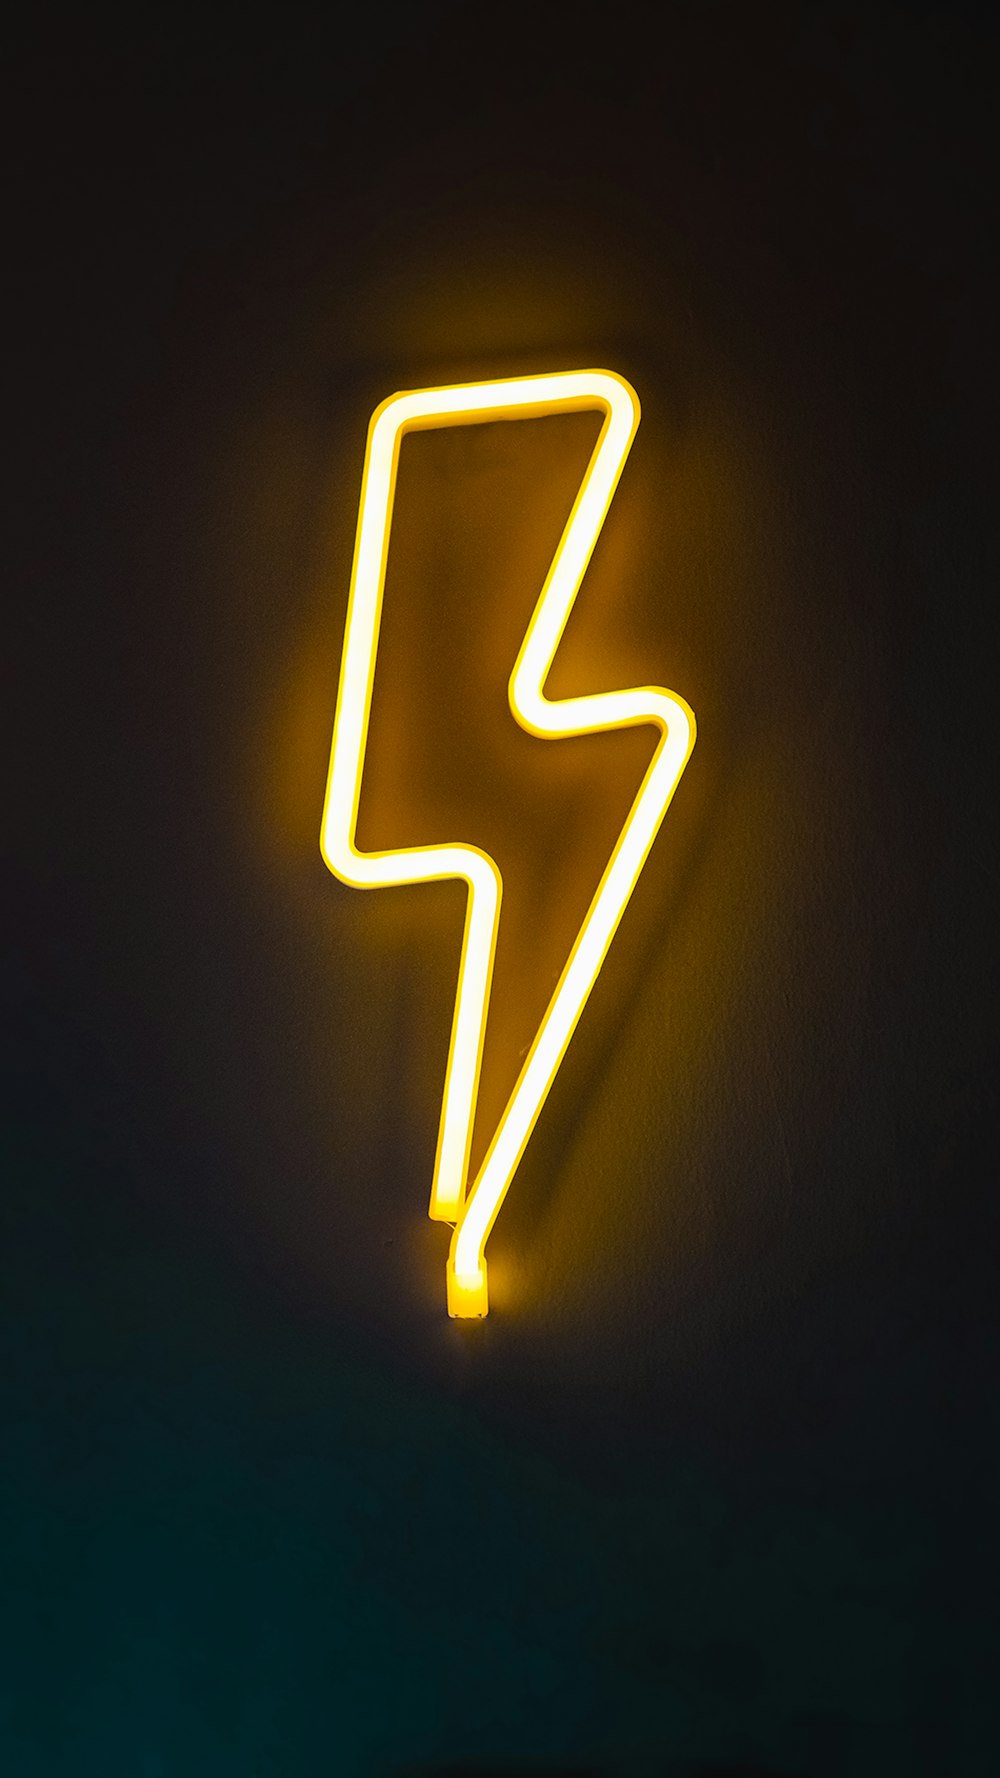 Yellow Light Pictures | Download Free Images on Unsplash